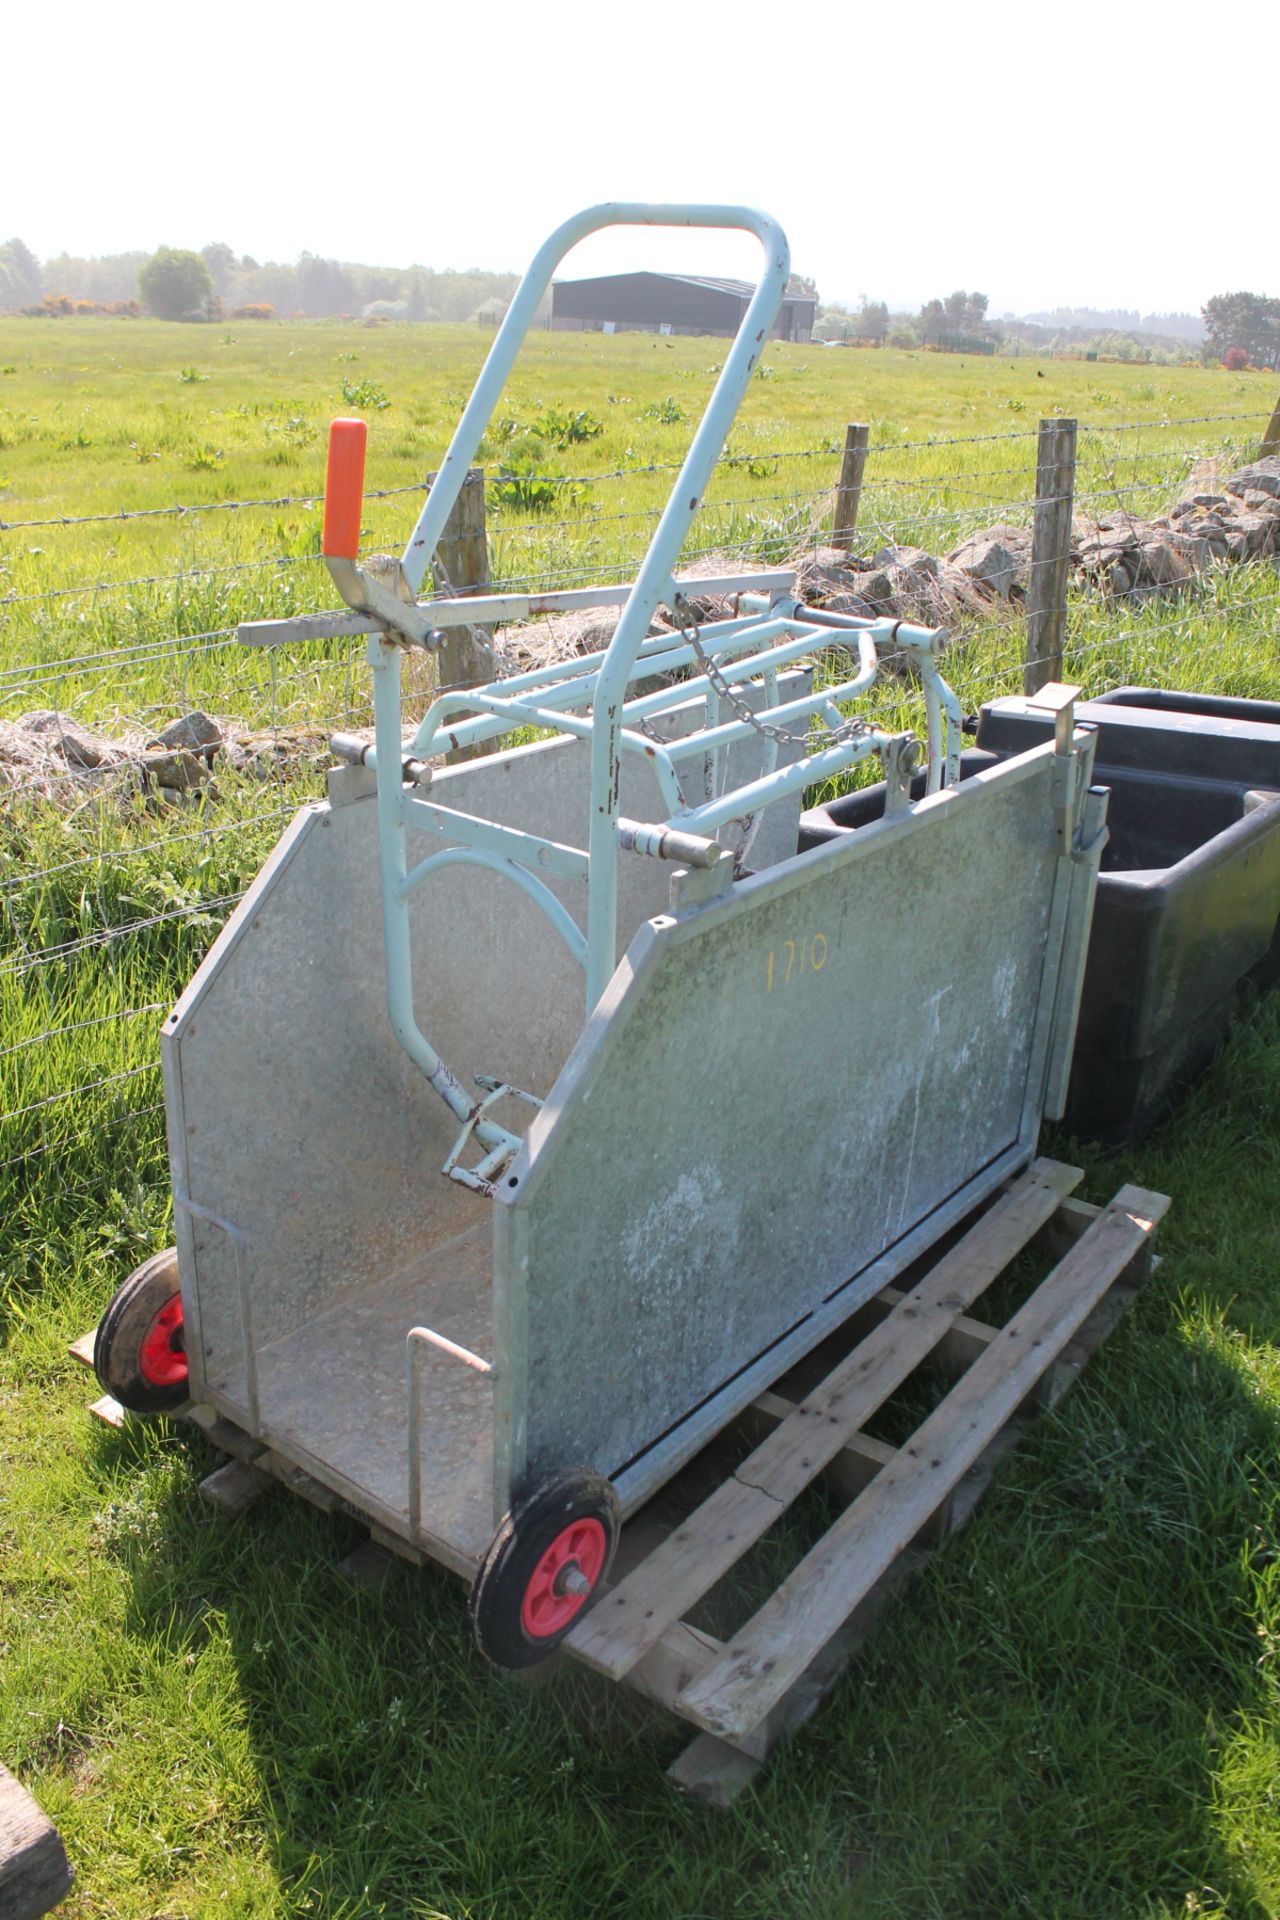 SHEEP TURN OVER CRATE